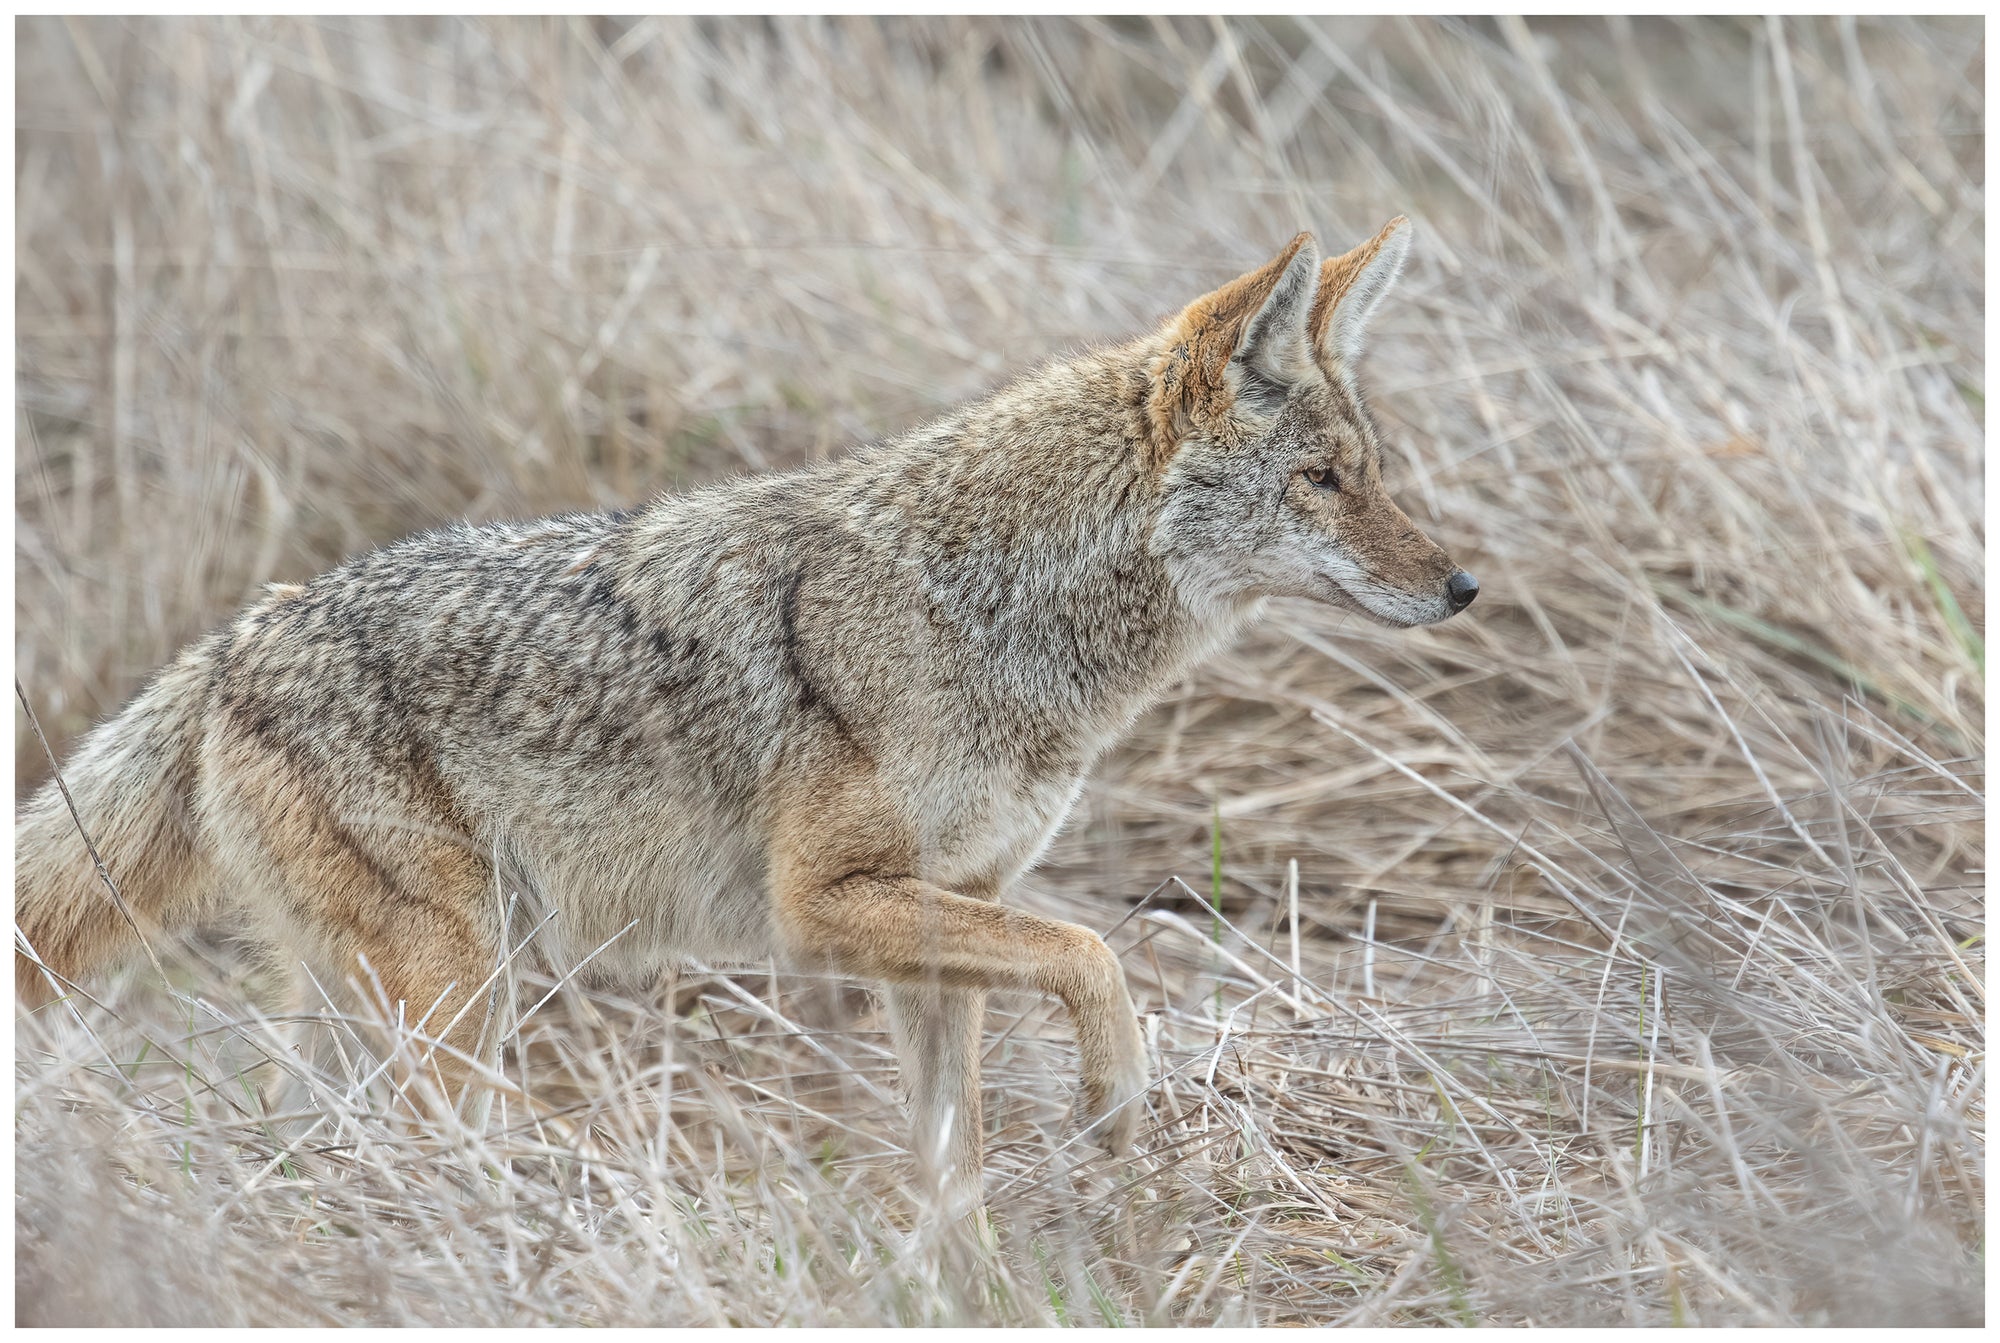 Wiley Coyote